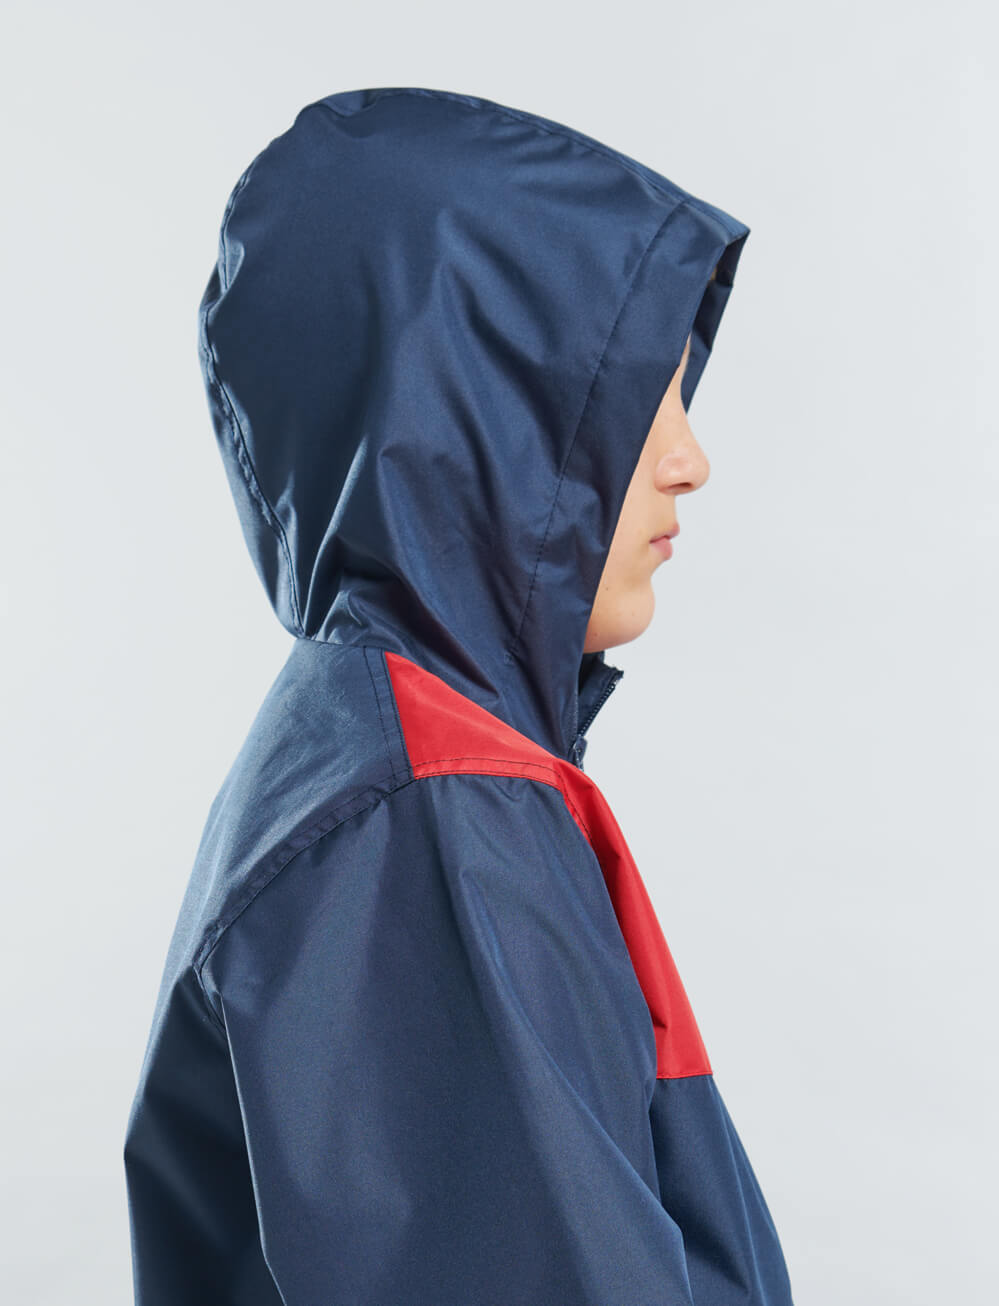 Official Arsenal Kids Shower Jacket - Navy - The World Football Store